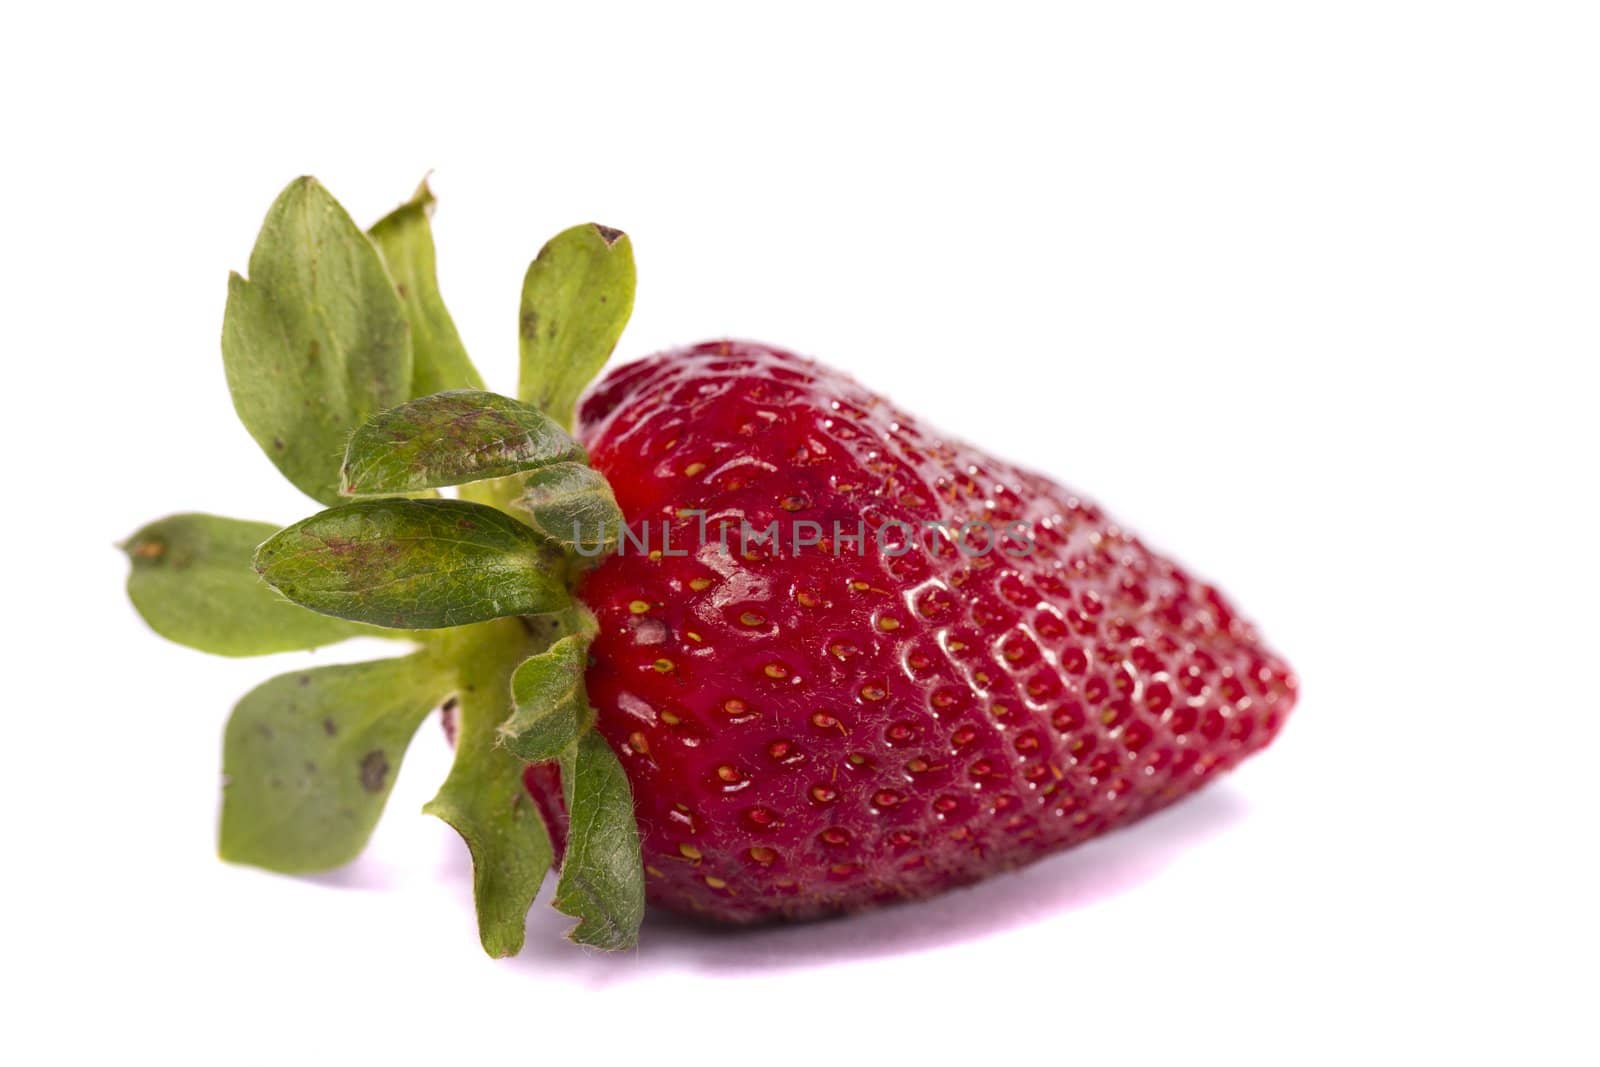 Close view of a strawberry fruit isolated on a white background.